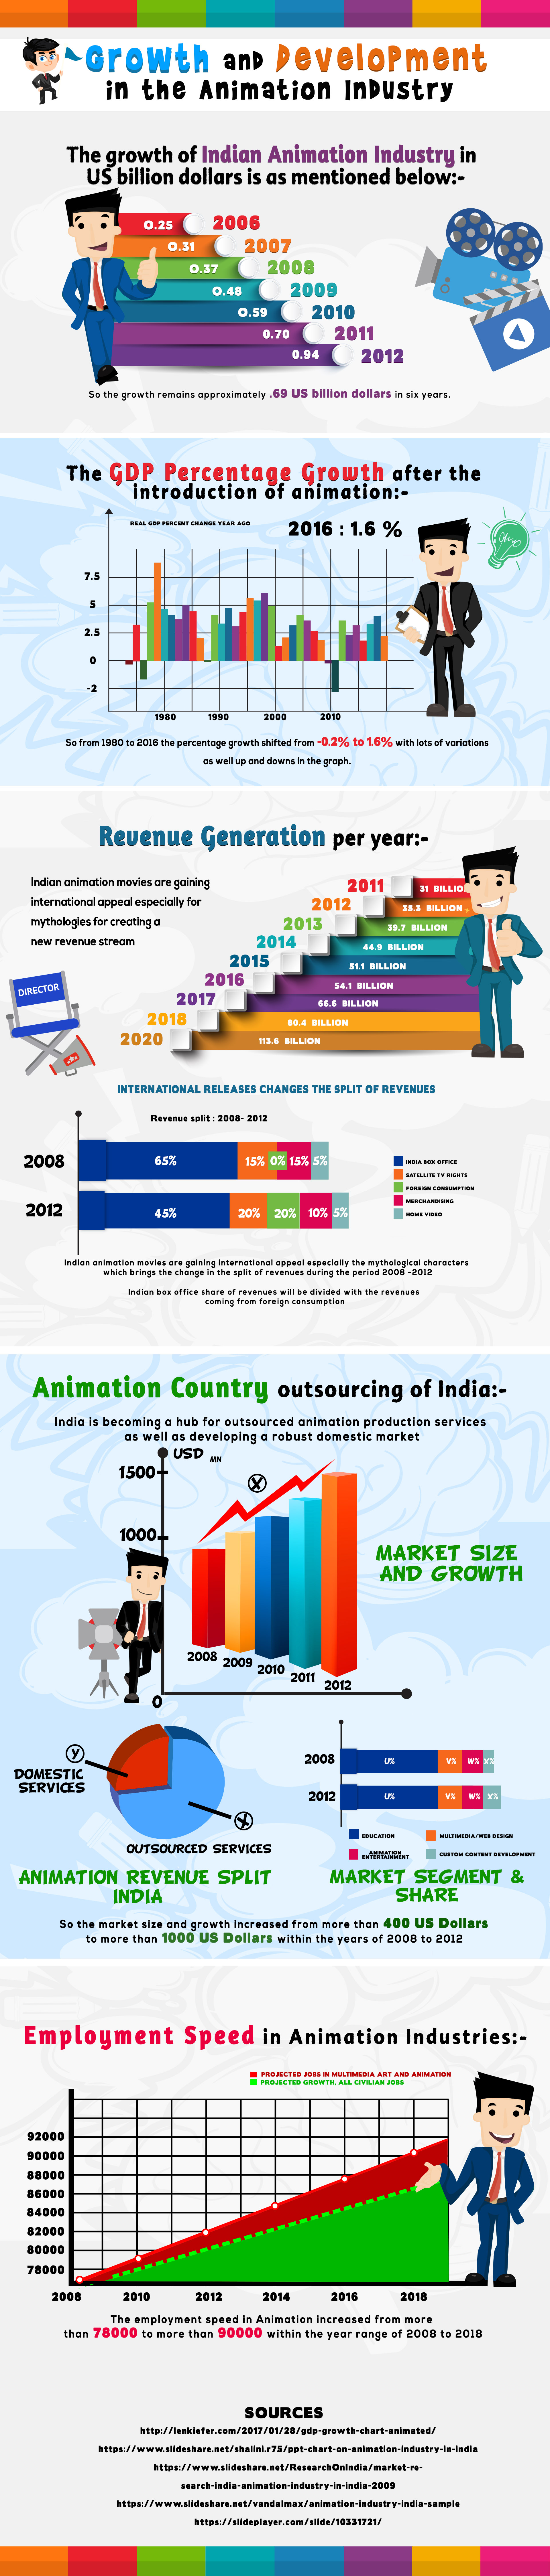 Growth And Development In Animation Industry - Prismart Blogs